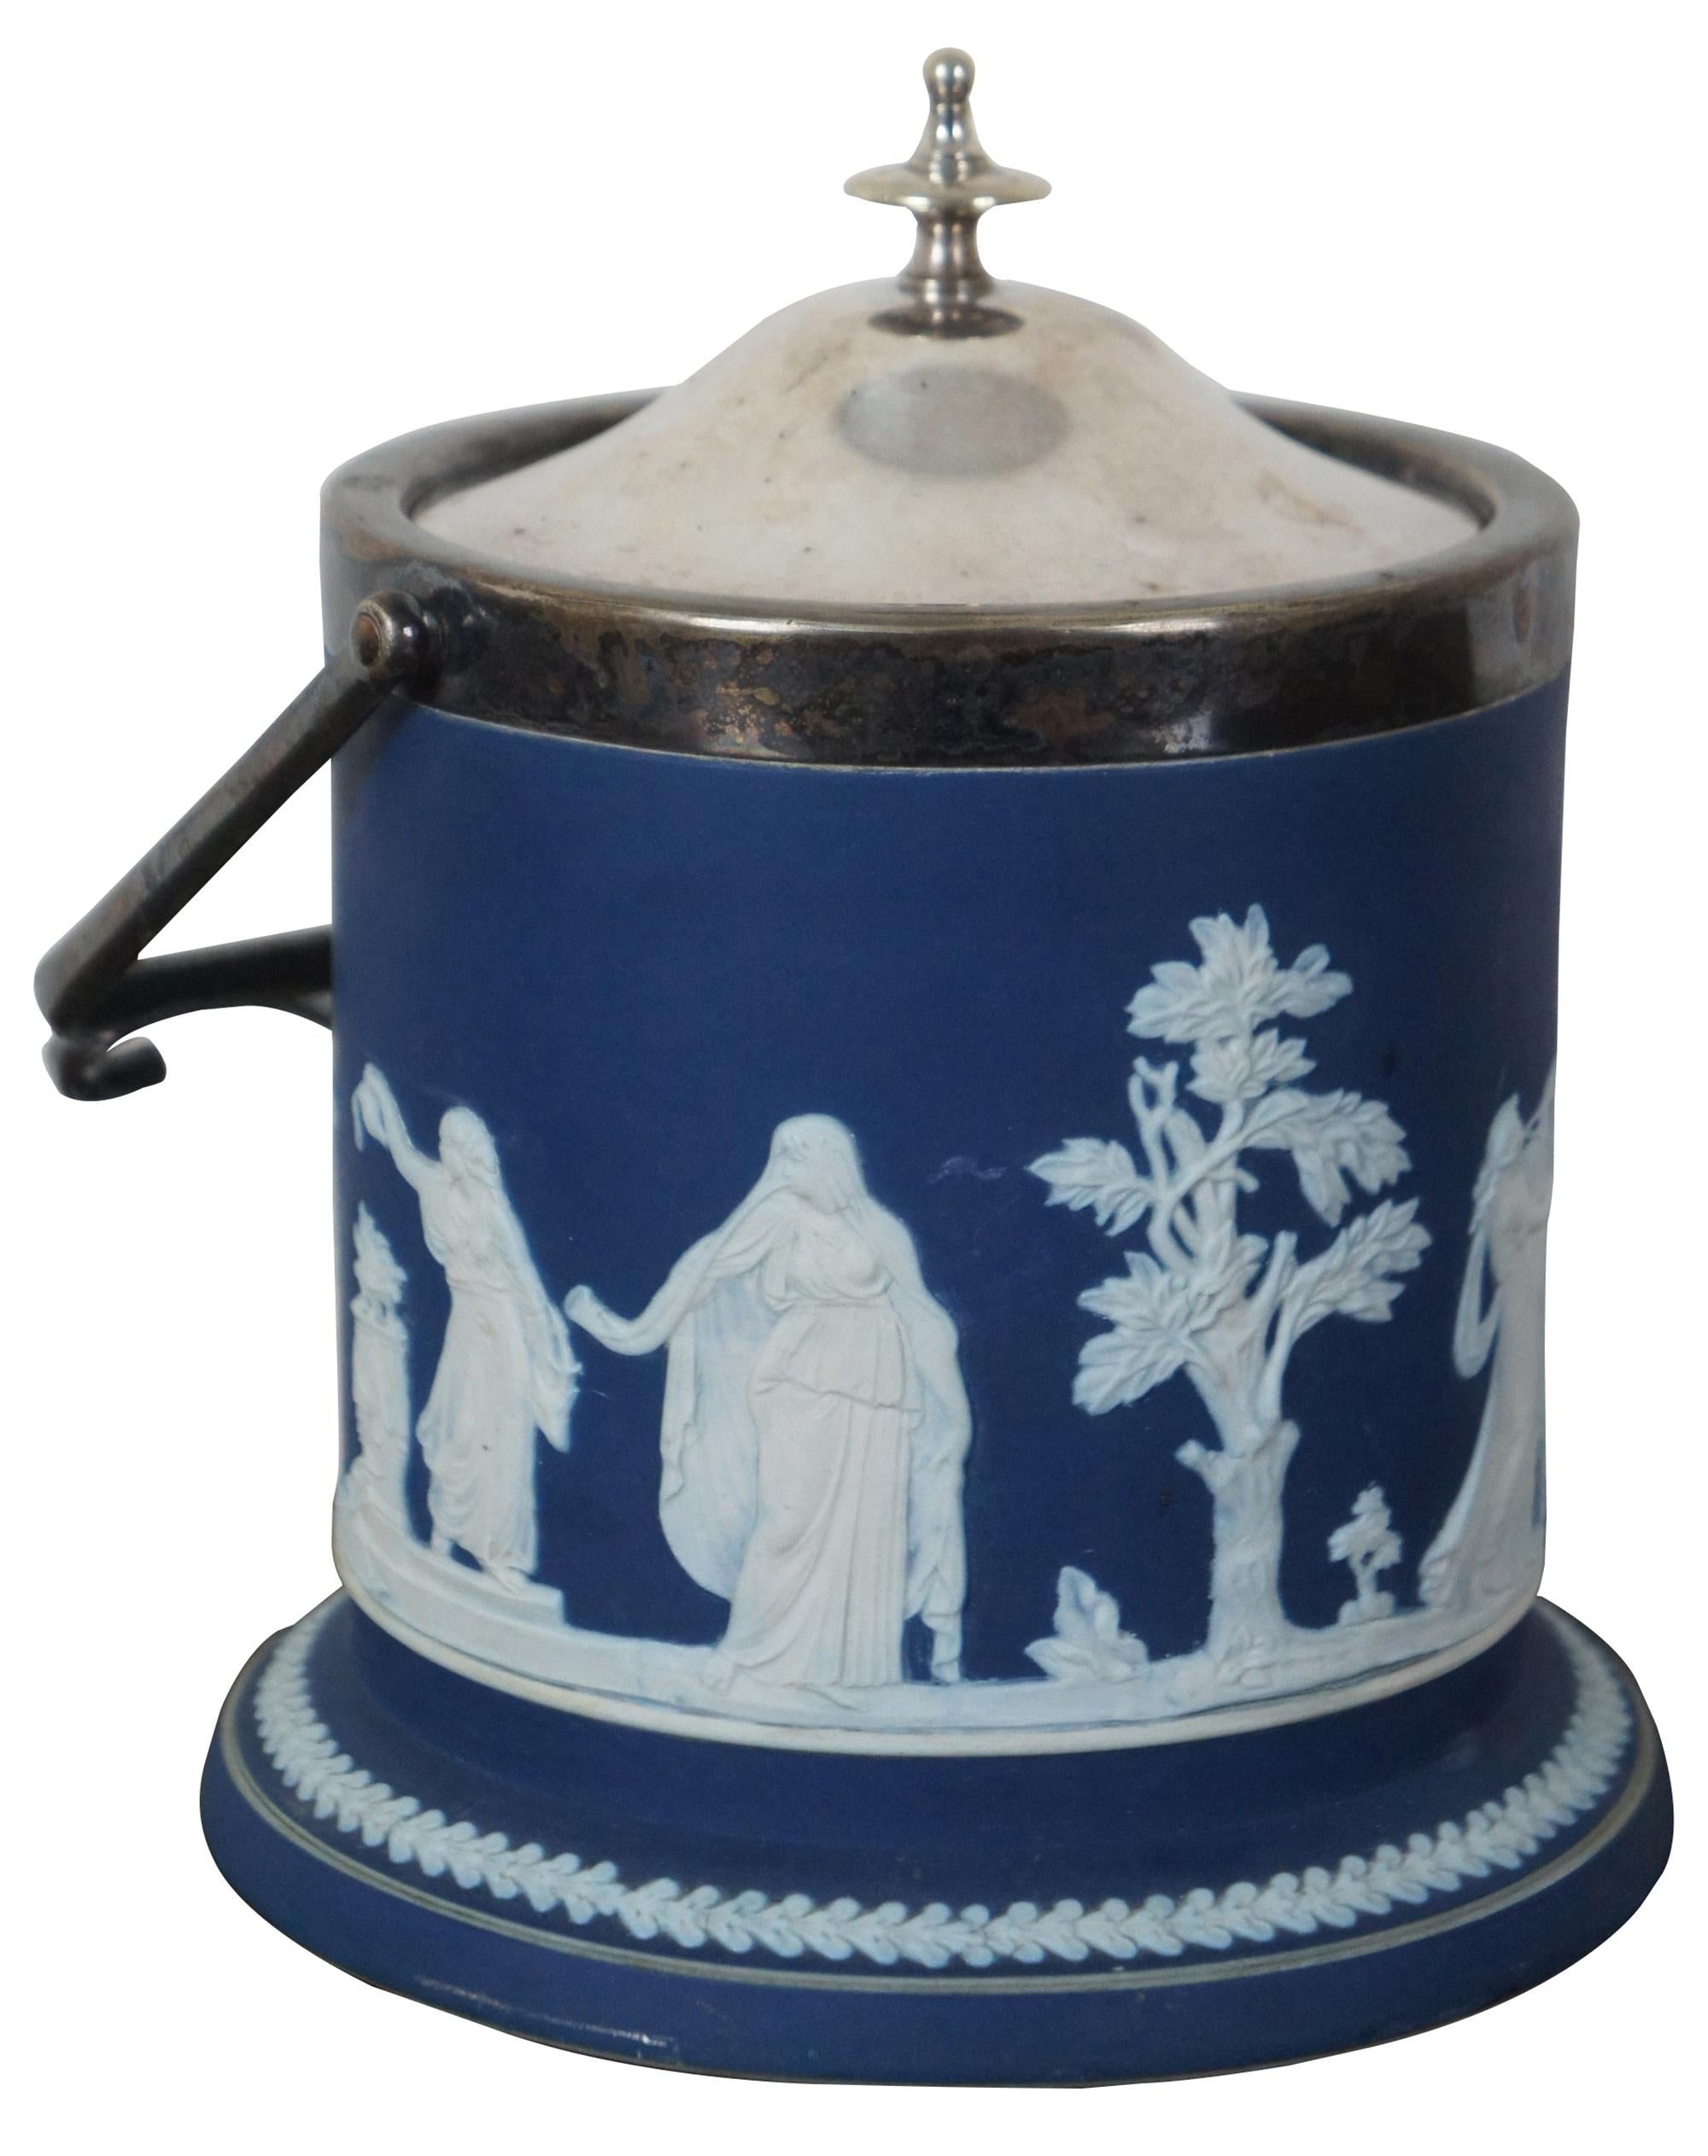 Antique late 19th century Wedgwood style blue and white jasperware biscuit jar by William Adams of Tunstall, England with EPNS silver plate lid and handle by Edwin Blyde and Co, Sheffield.

Measures: Height to top of handle 10”.